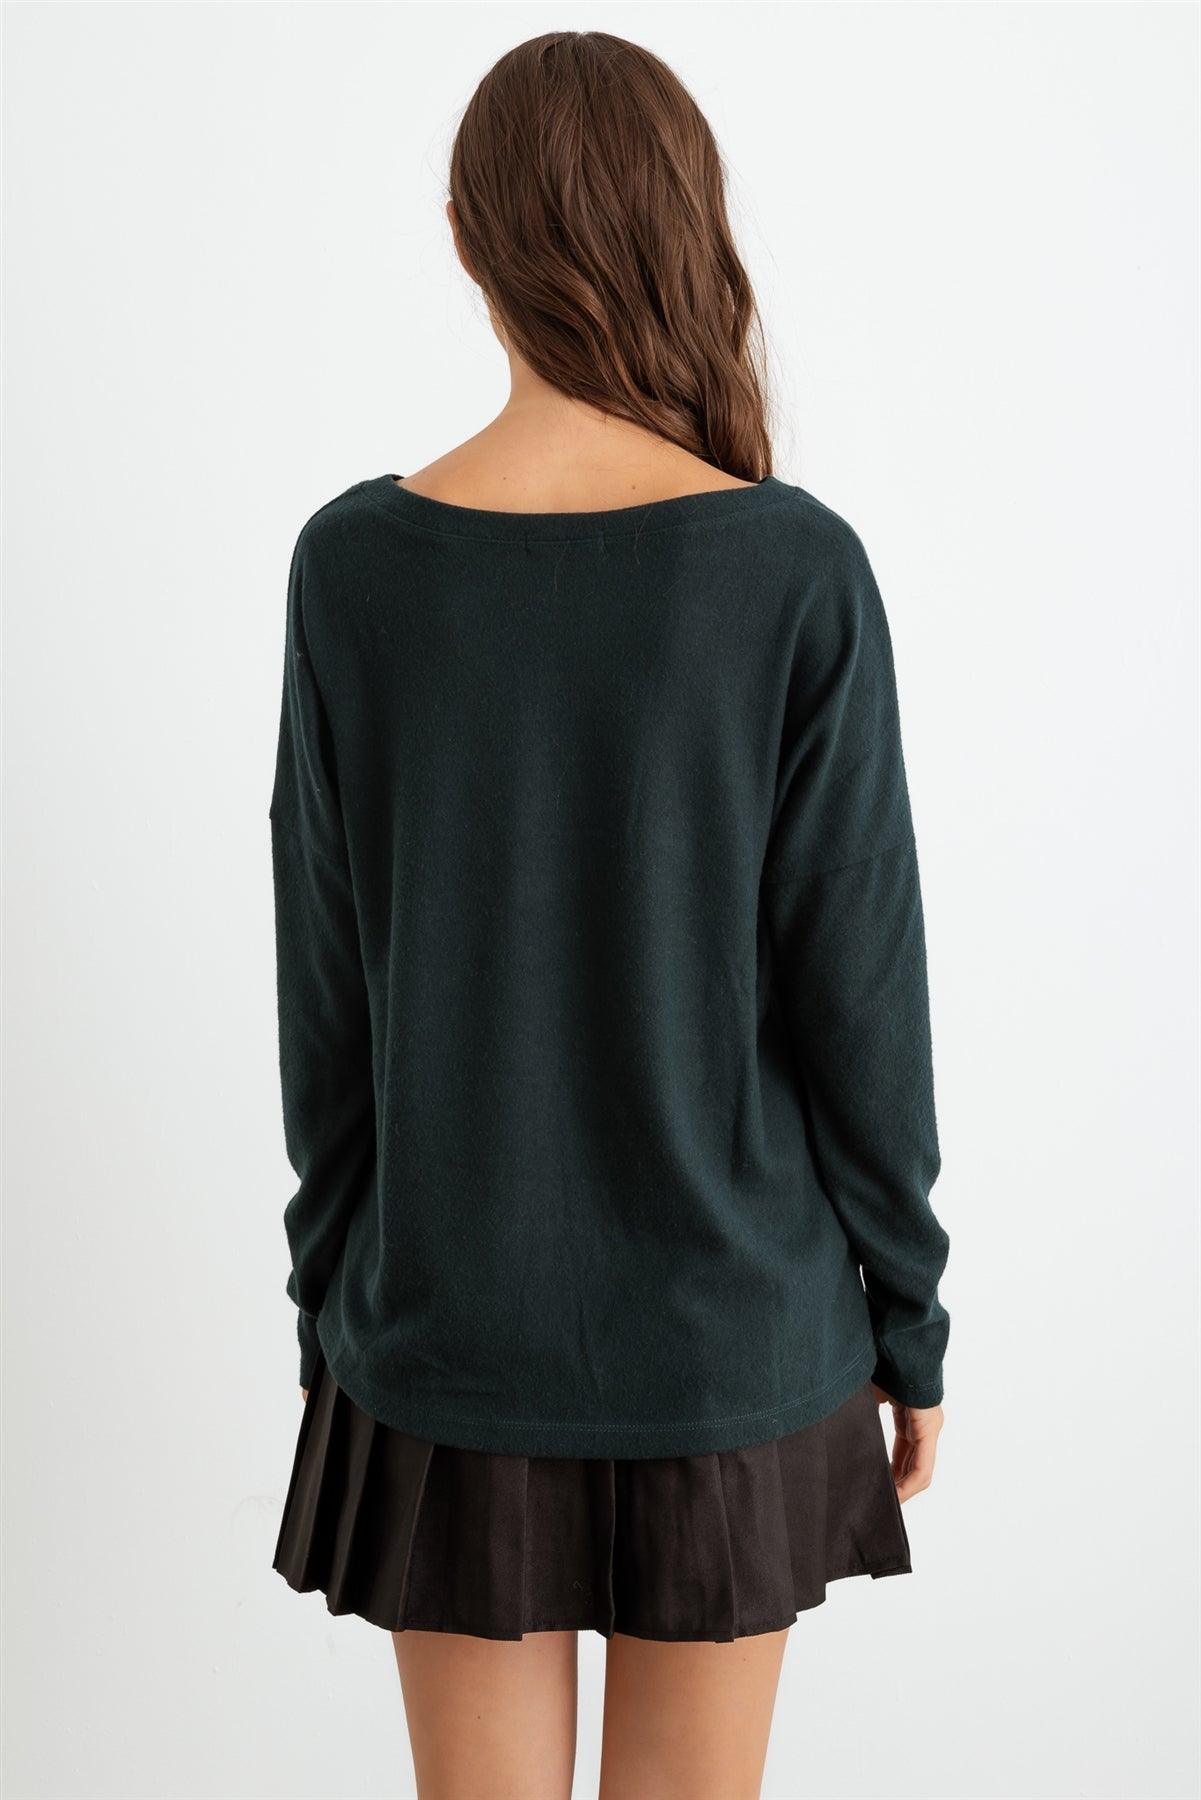 Hunter Green Long Sleeve Crew Neck Soft To Touch Top /1-1-1